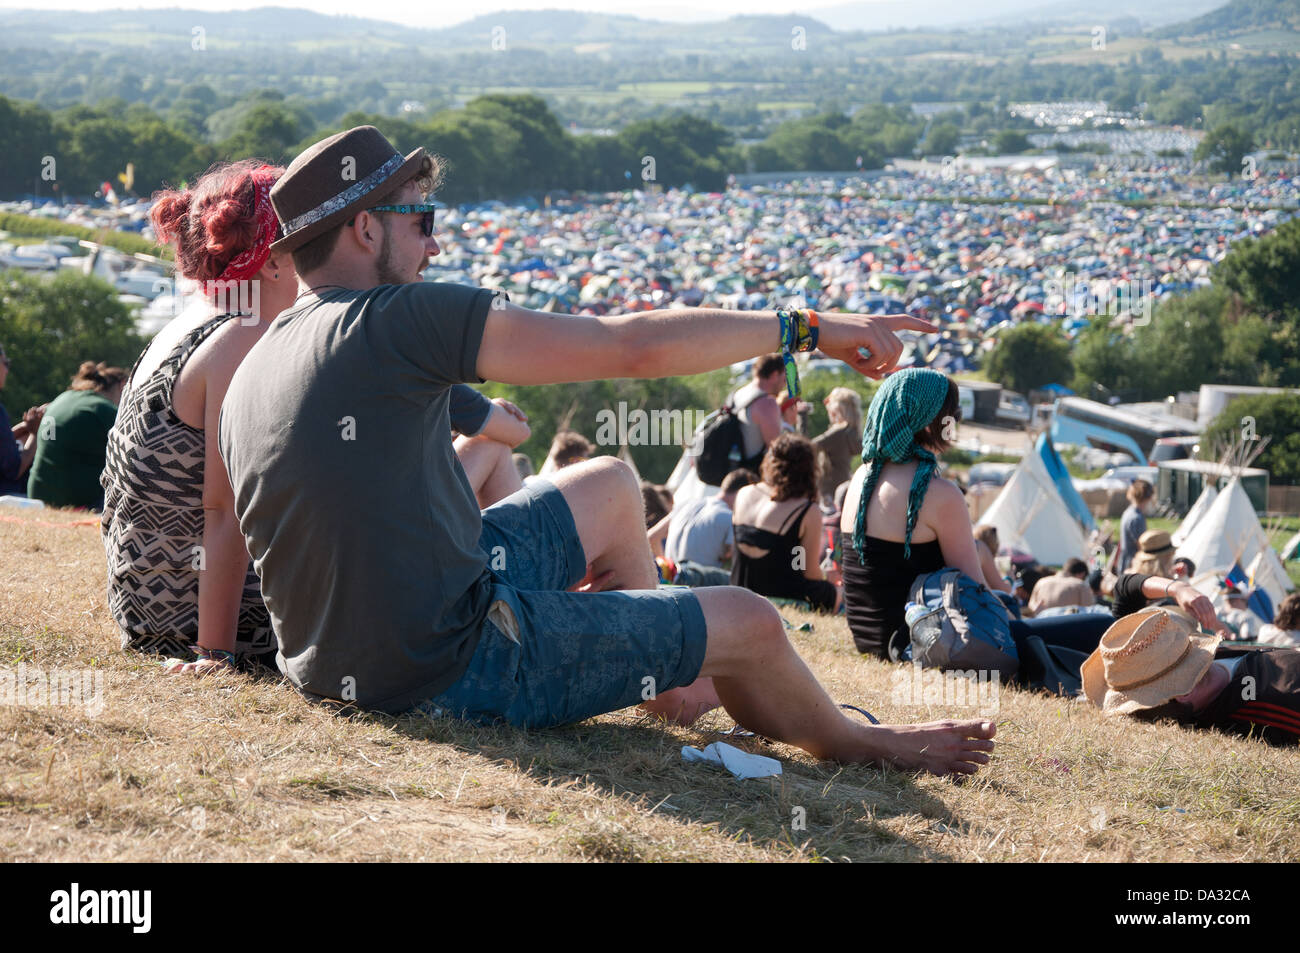 A couple sit at the top of The Park at Glastonbury Festival of Contemporary Performing Arts 2013, admiring the view. Stock Photo